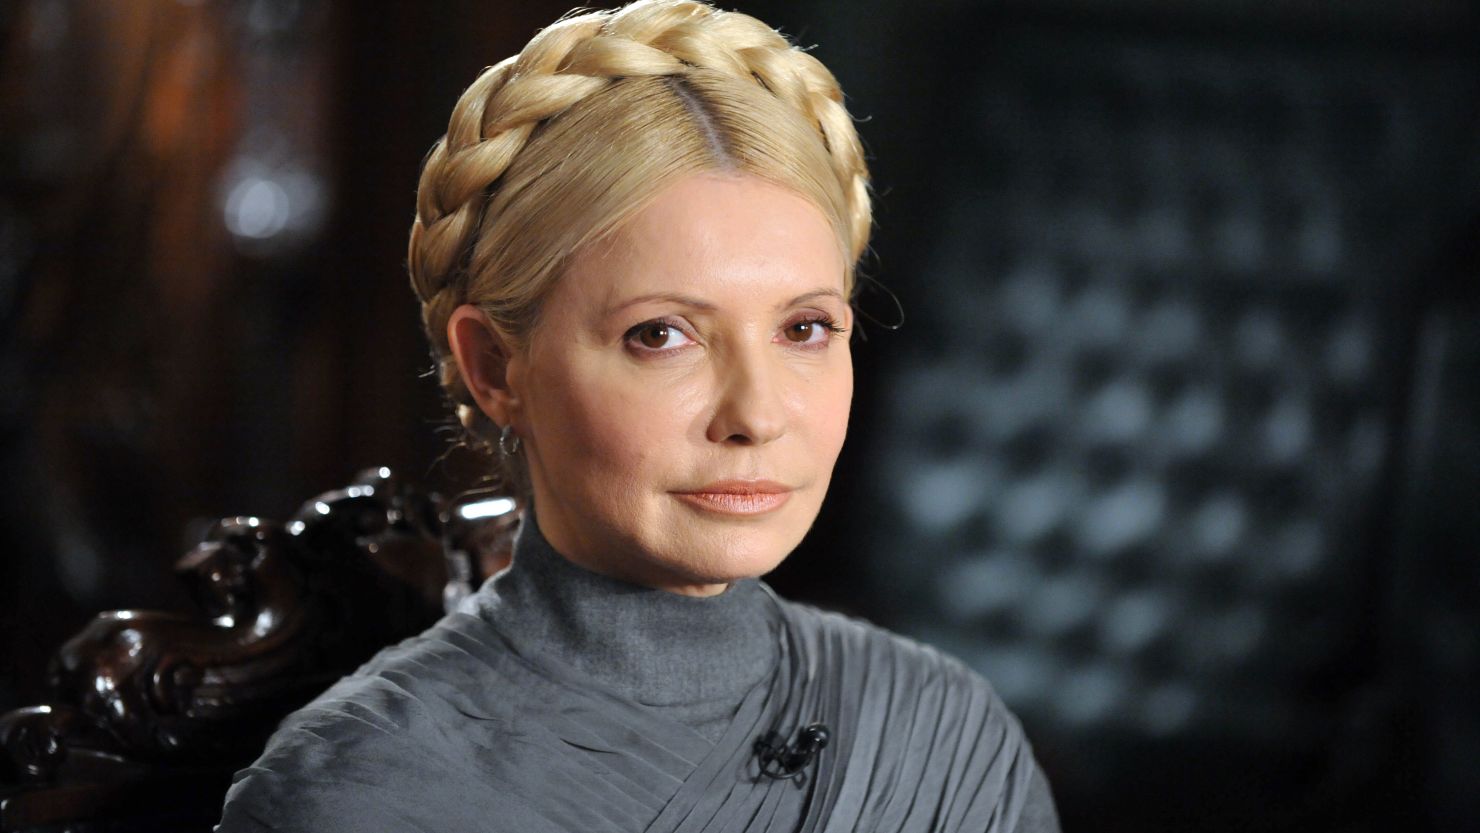 Yulia Tymoshenko was found guilty in October 2011 of  "abusing her office" over a 2009 deal with Gazprom.